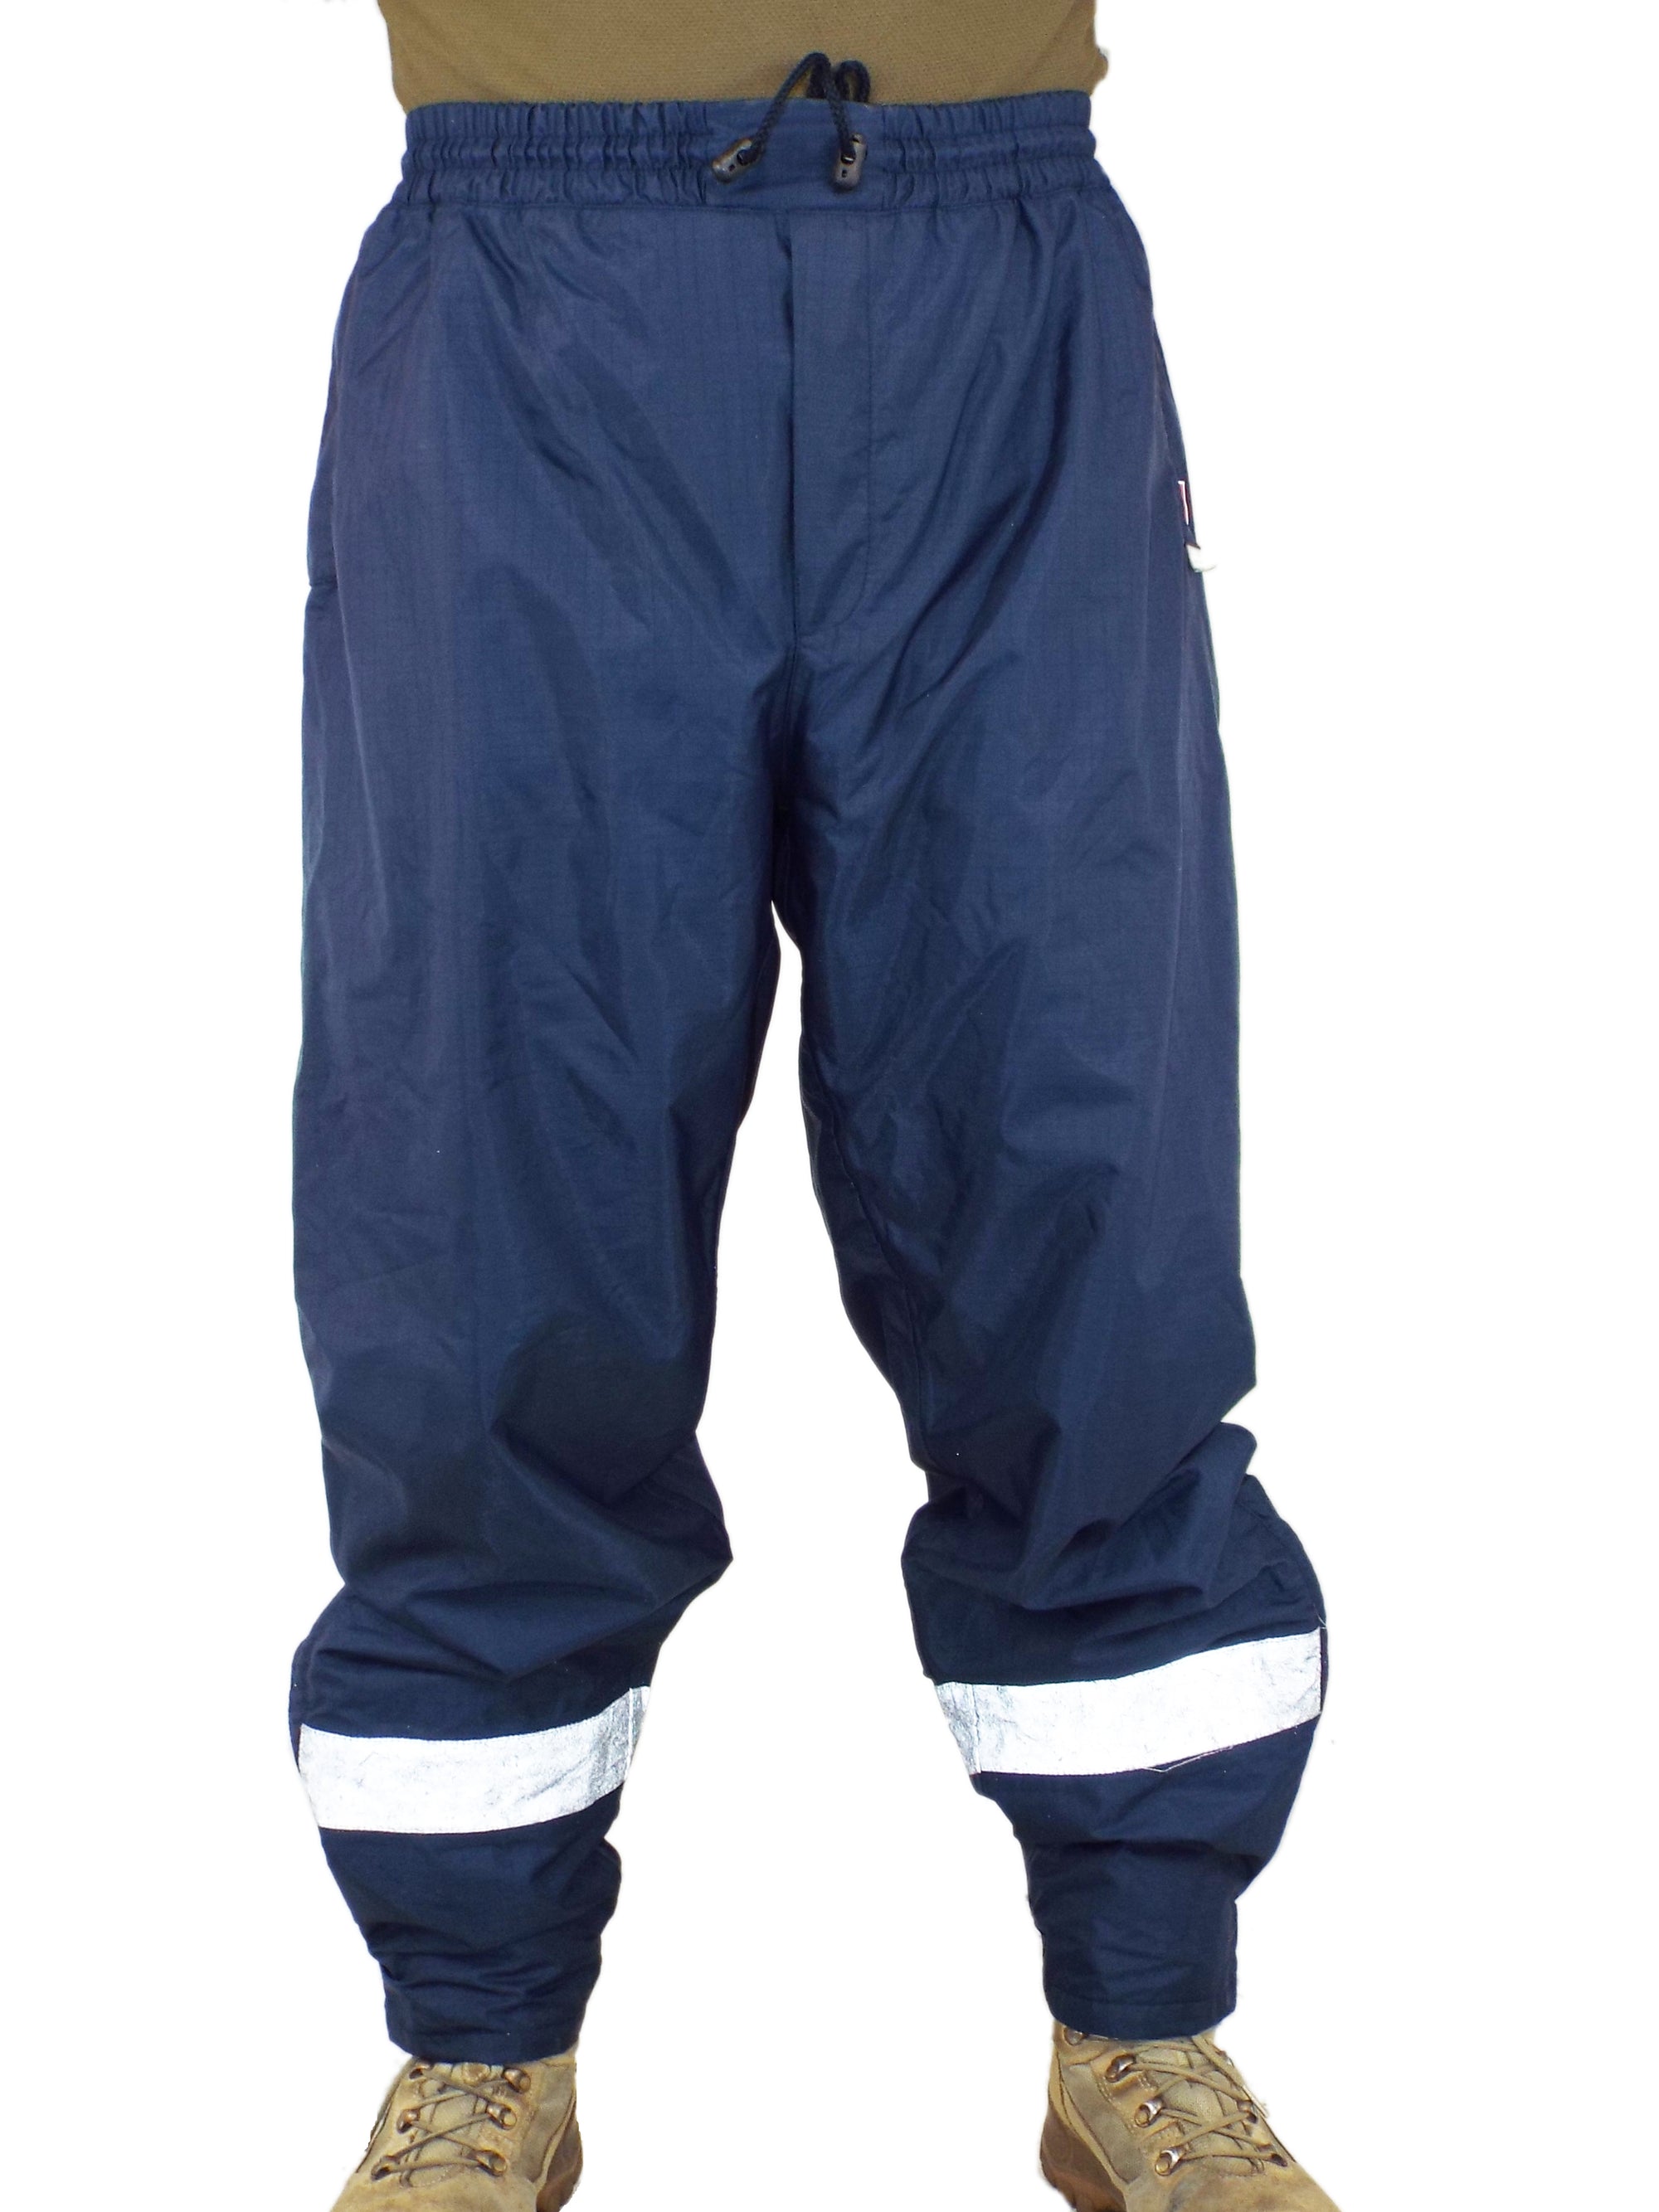 Dutch - Blue Waterproof Rip-Stop Over-Trousers with reflective band – Grade 1